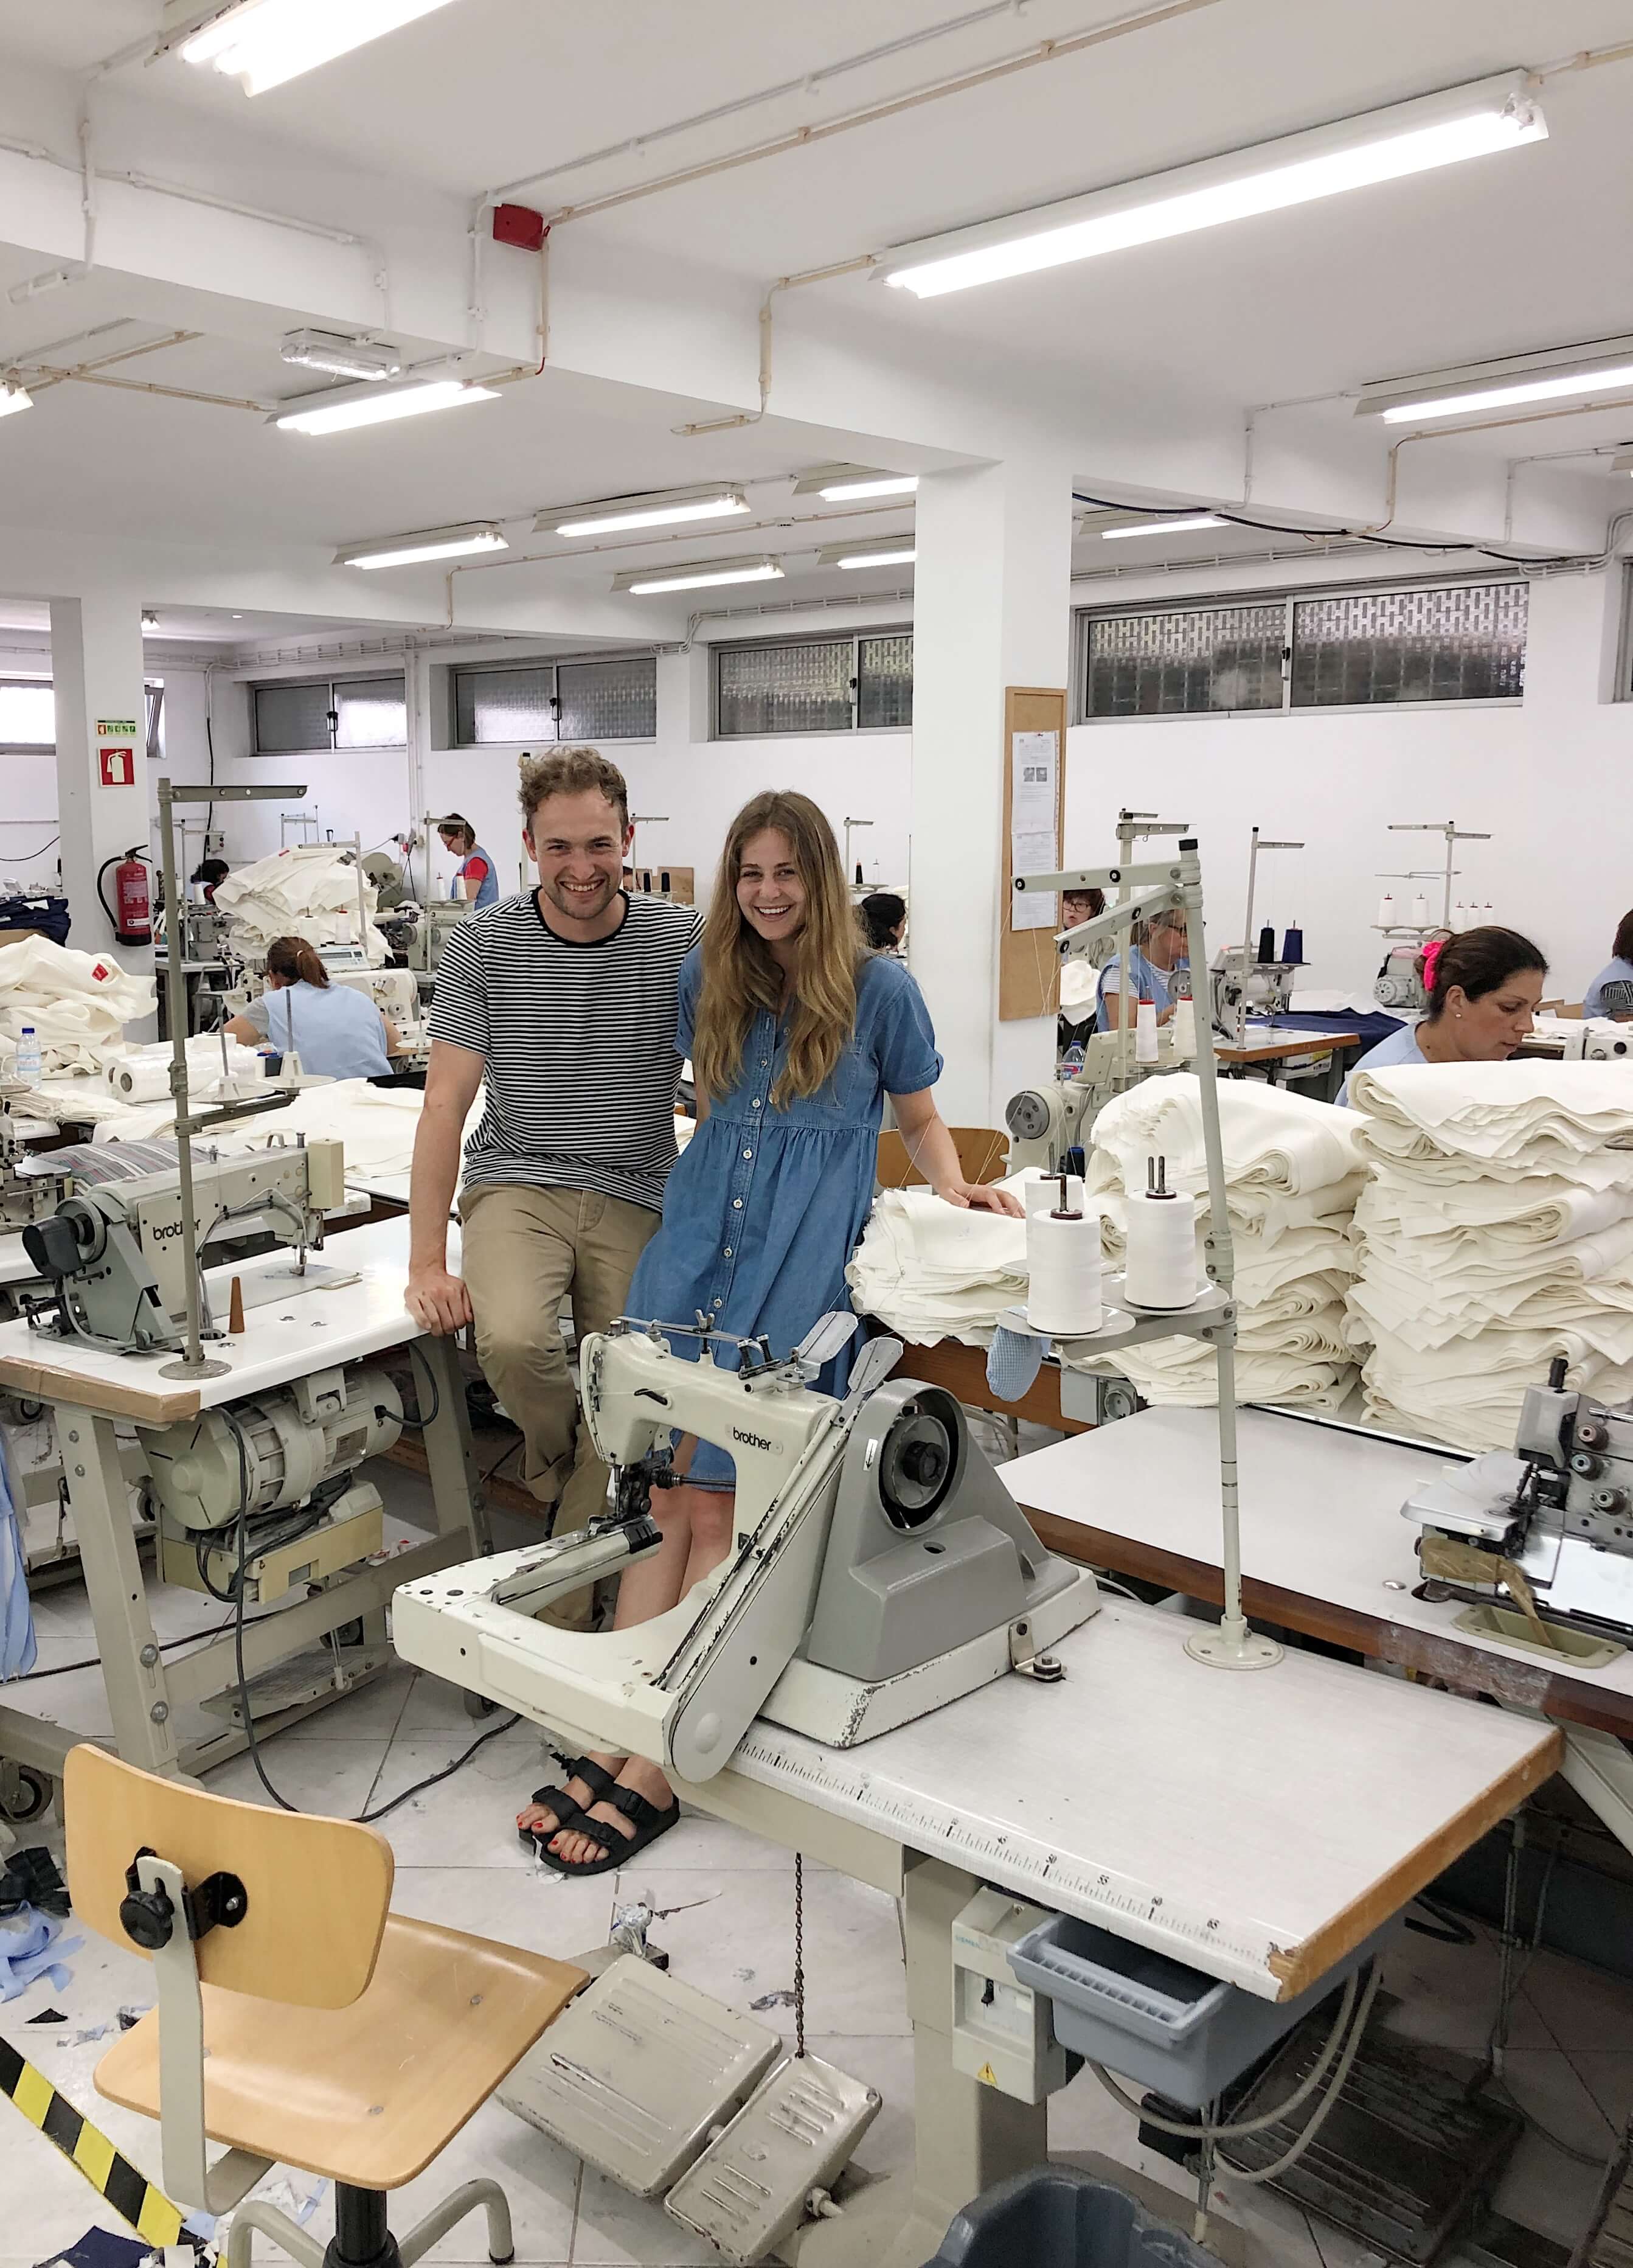 Huw and Becky standing at a clothing factory amidst workers sewing clothes